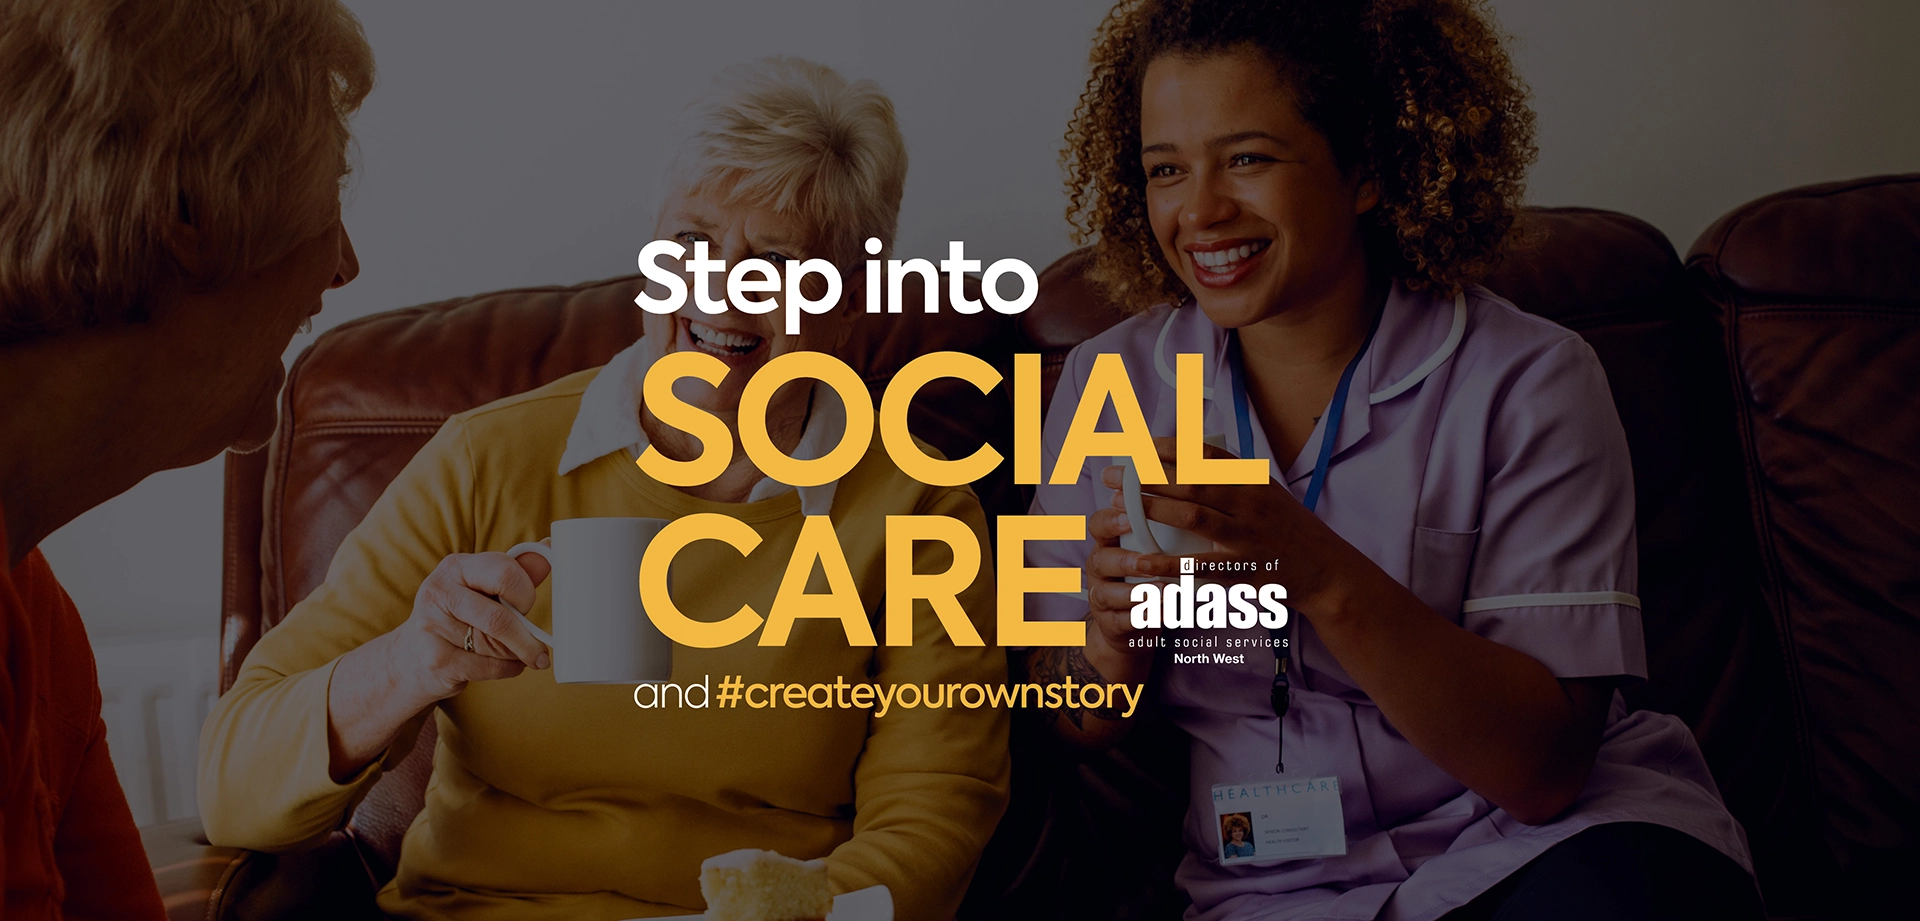 Step into Social care branding importance